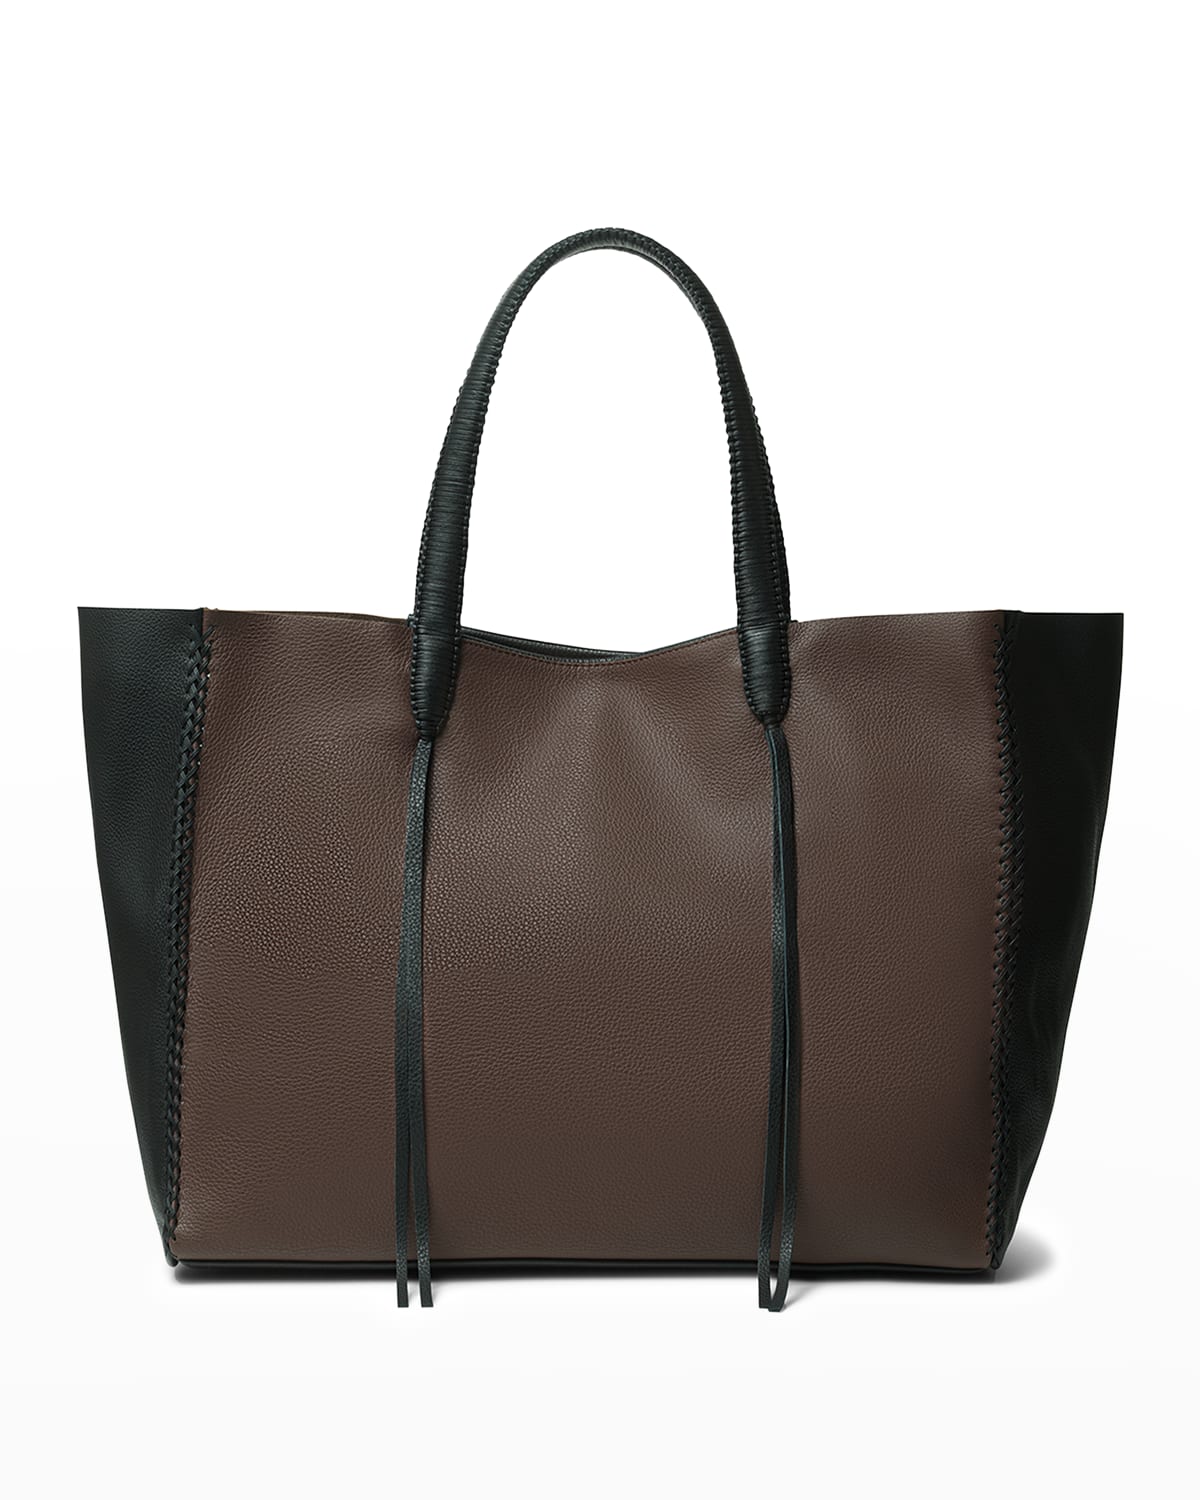 Duo Bicolor Leather Tote Bag